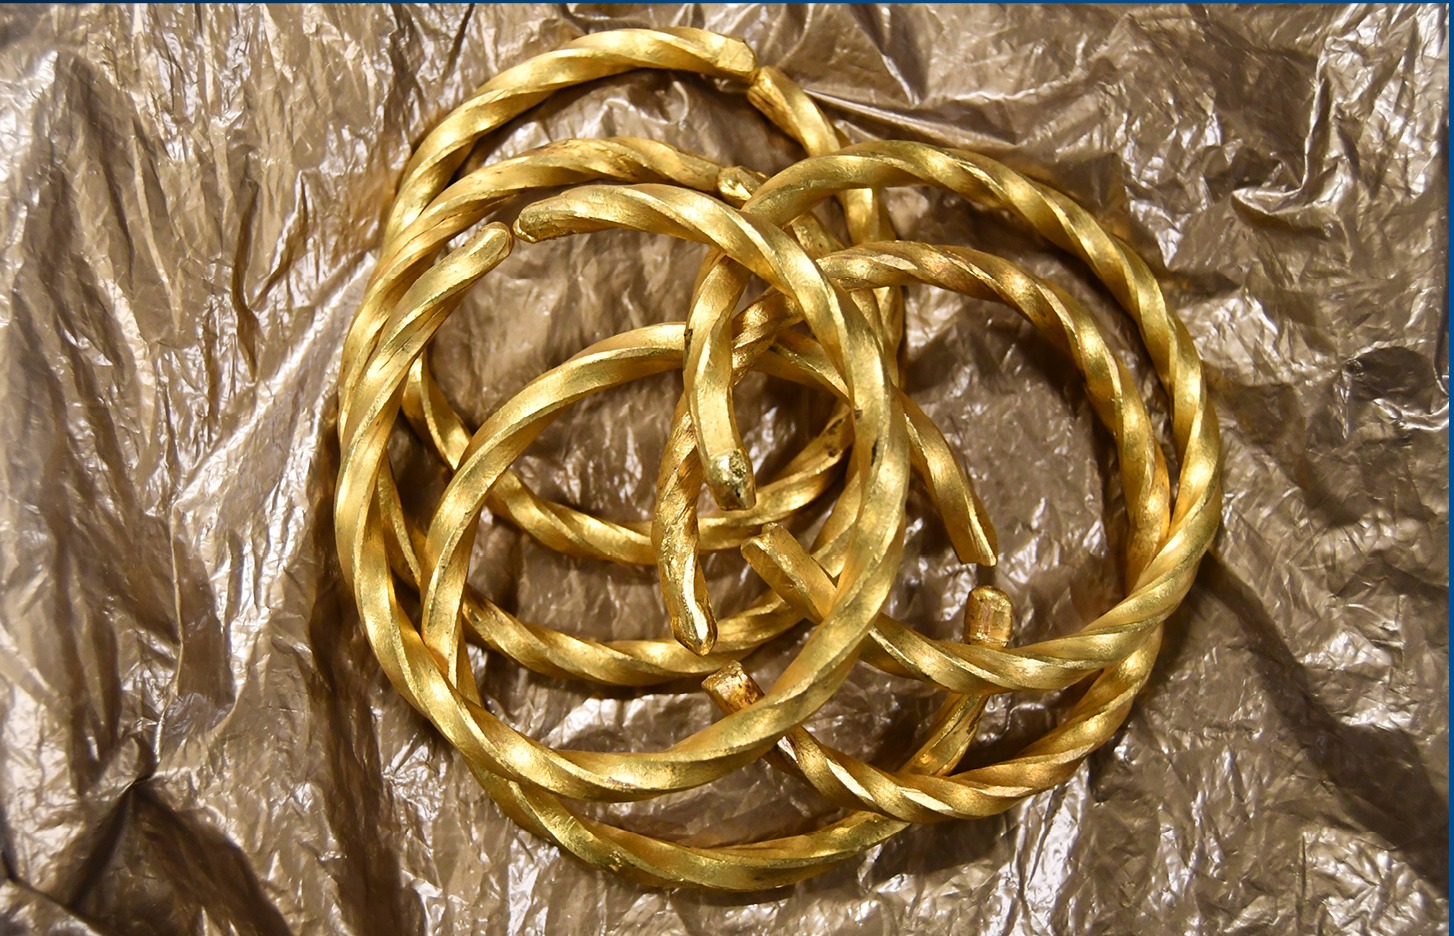 Six gold bracelets valued at more than $89,000 (£52,000) have been seized by cops